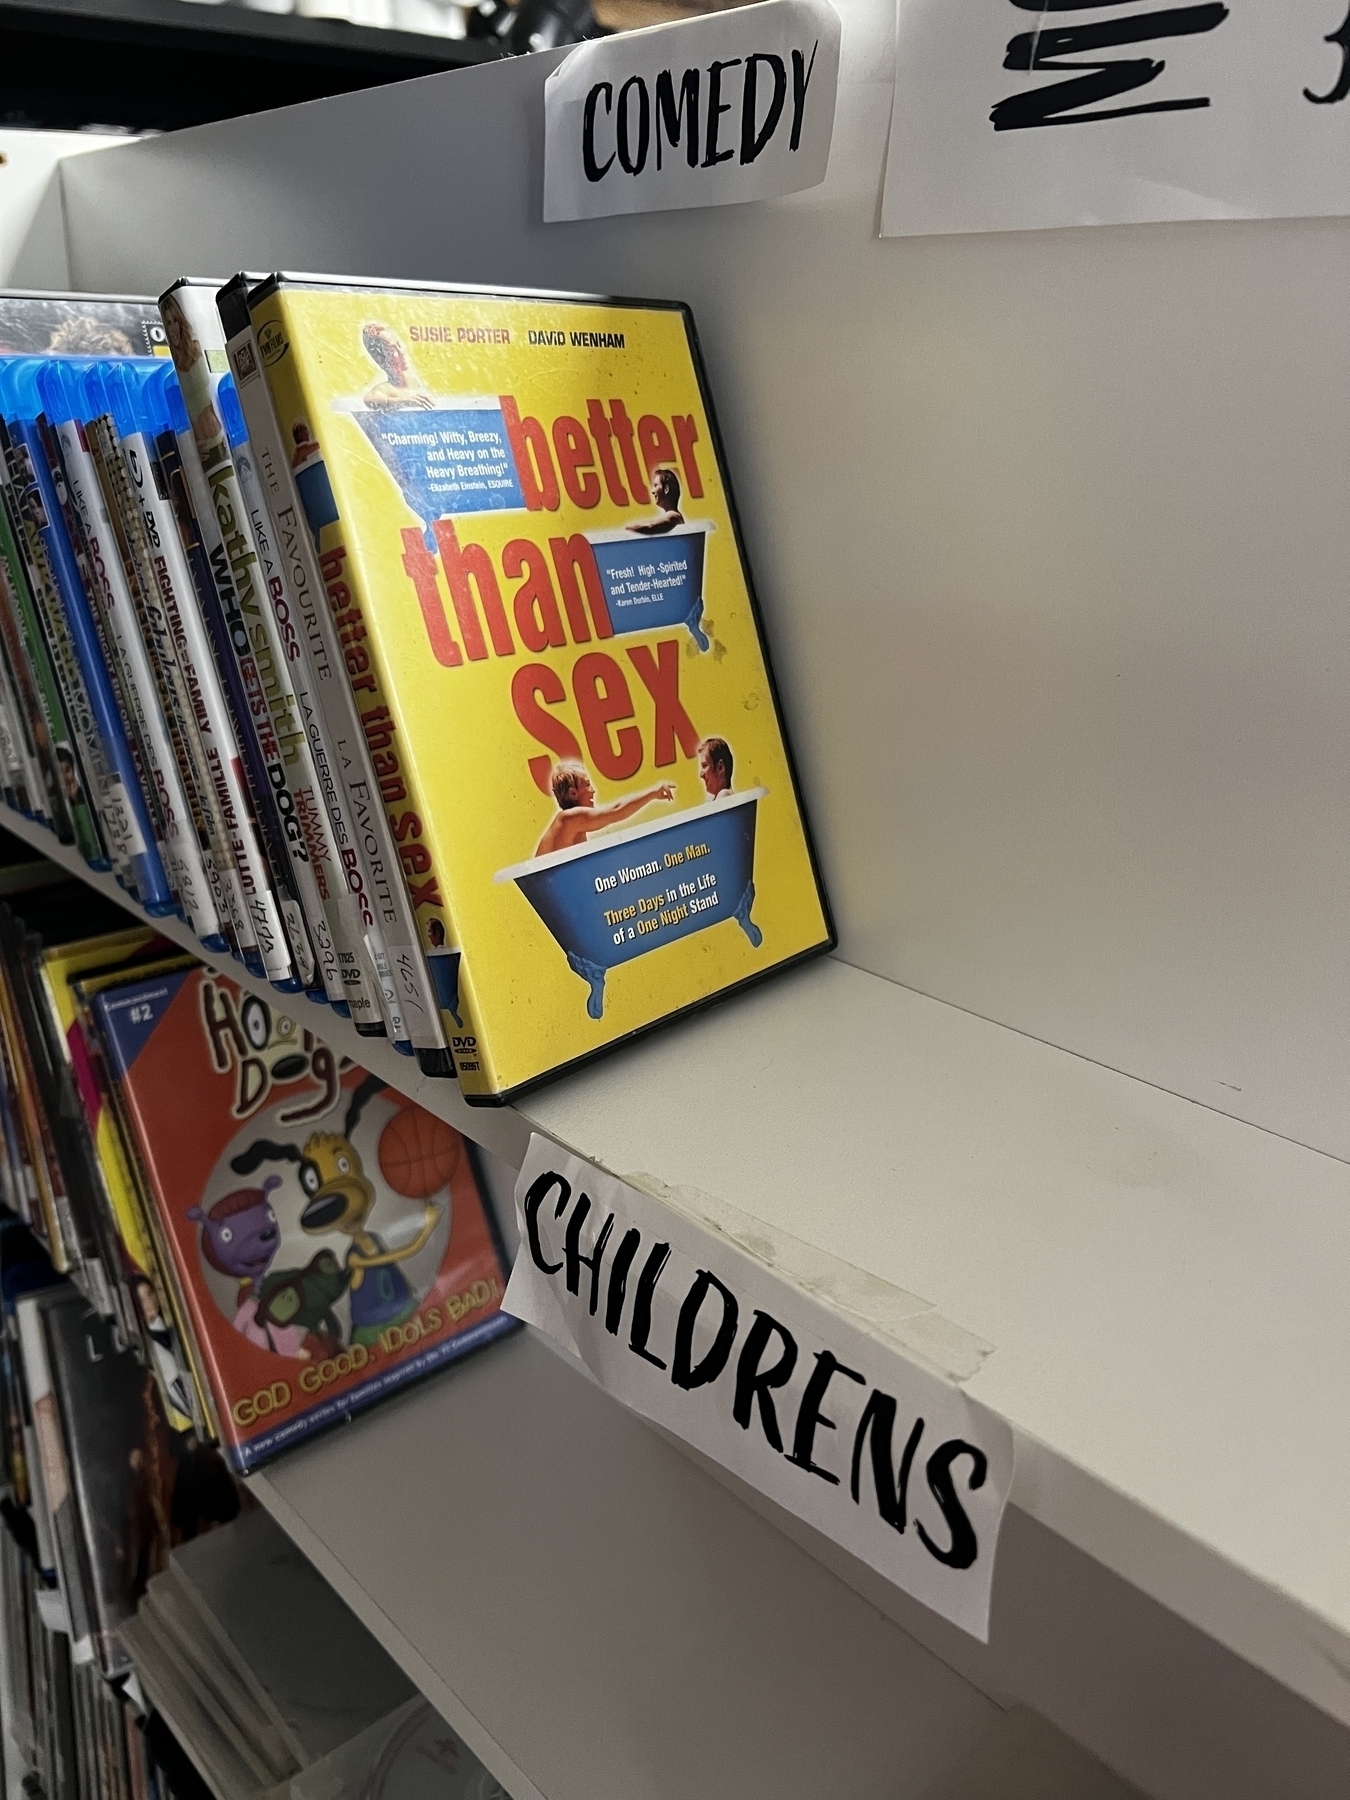 A dvd copy of “better than sex” is on a shelf just above the “childrens” label